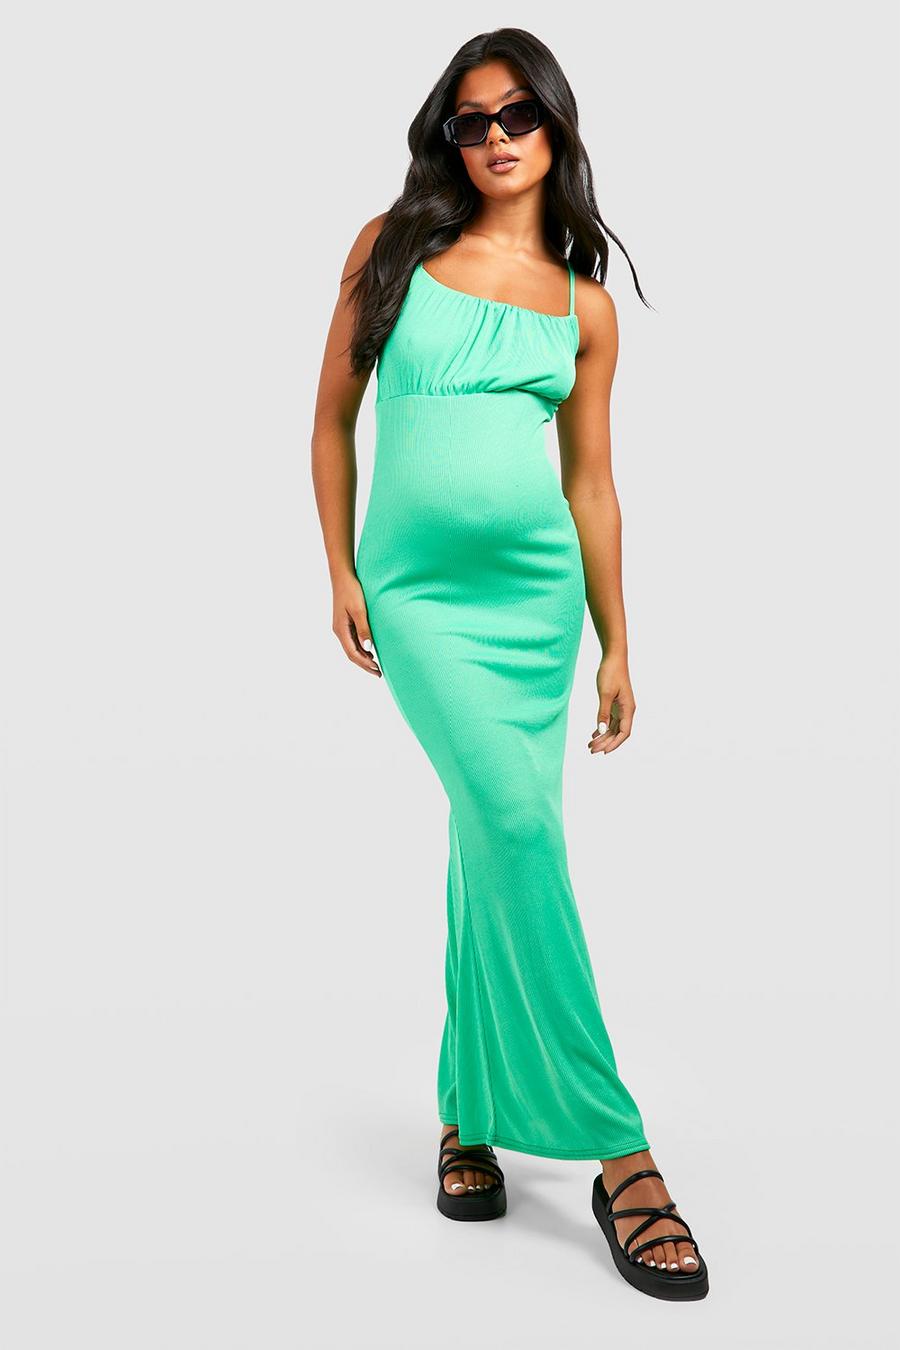 Bright green Maternity Ruched Bust Strappy Maxi Dress